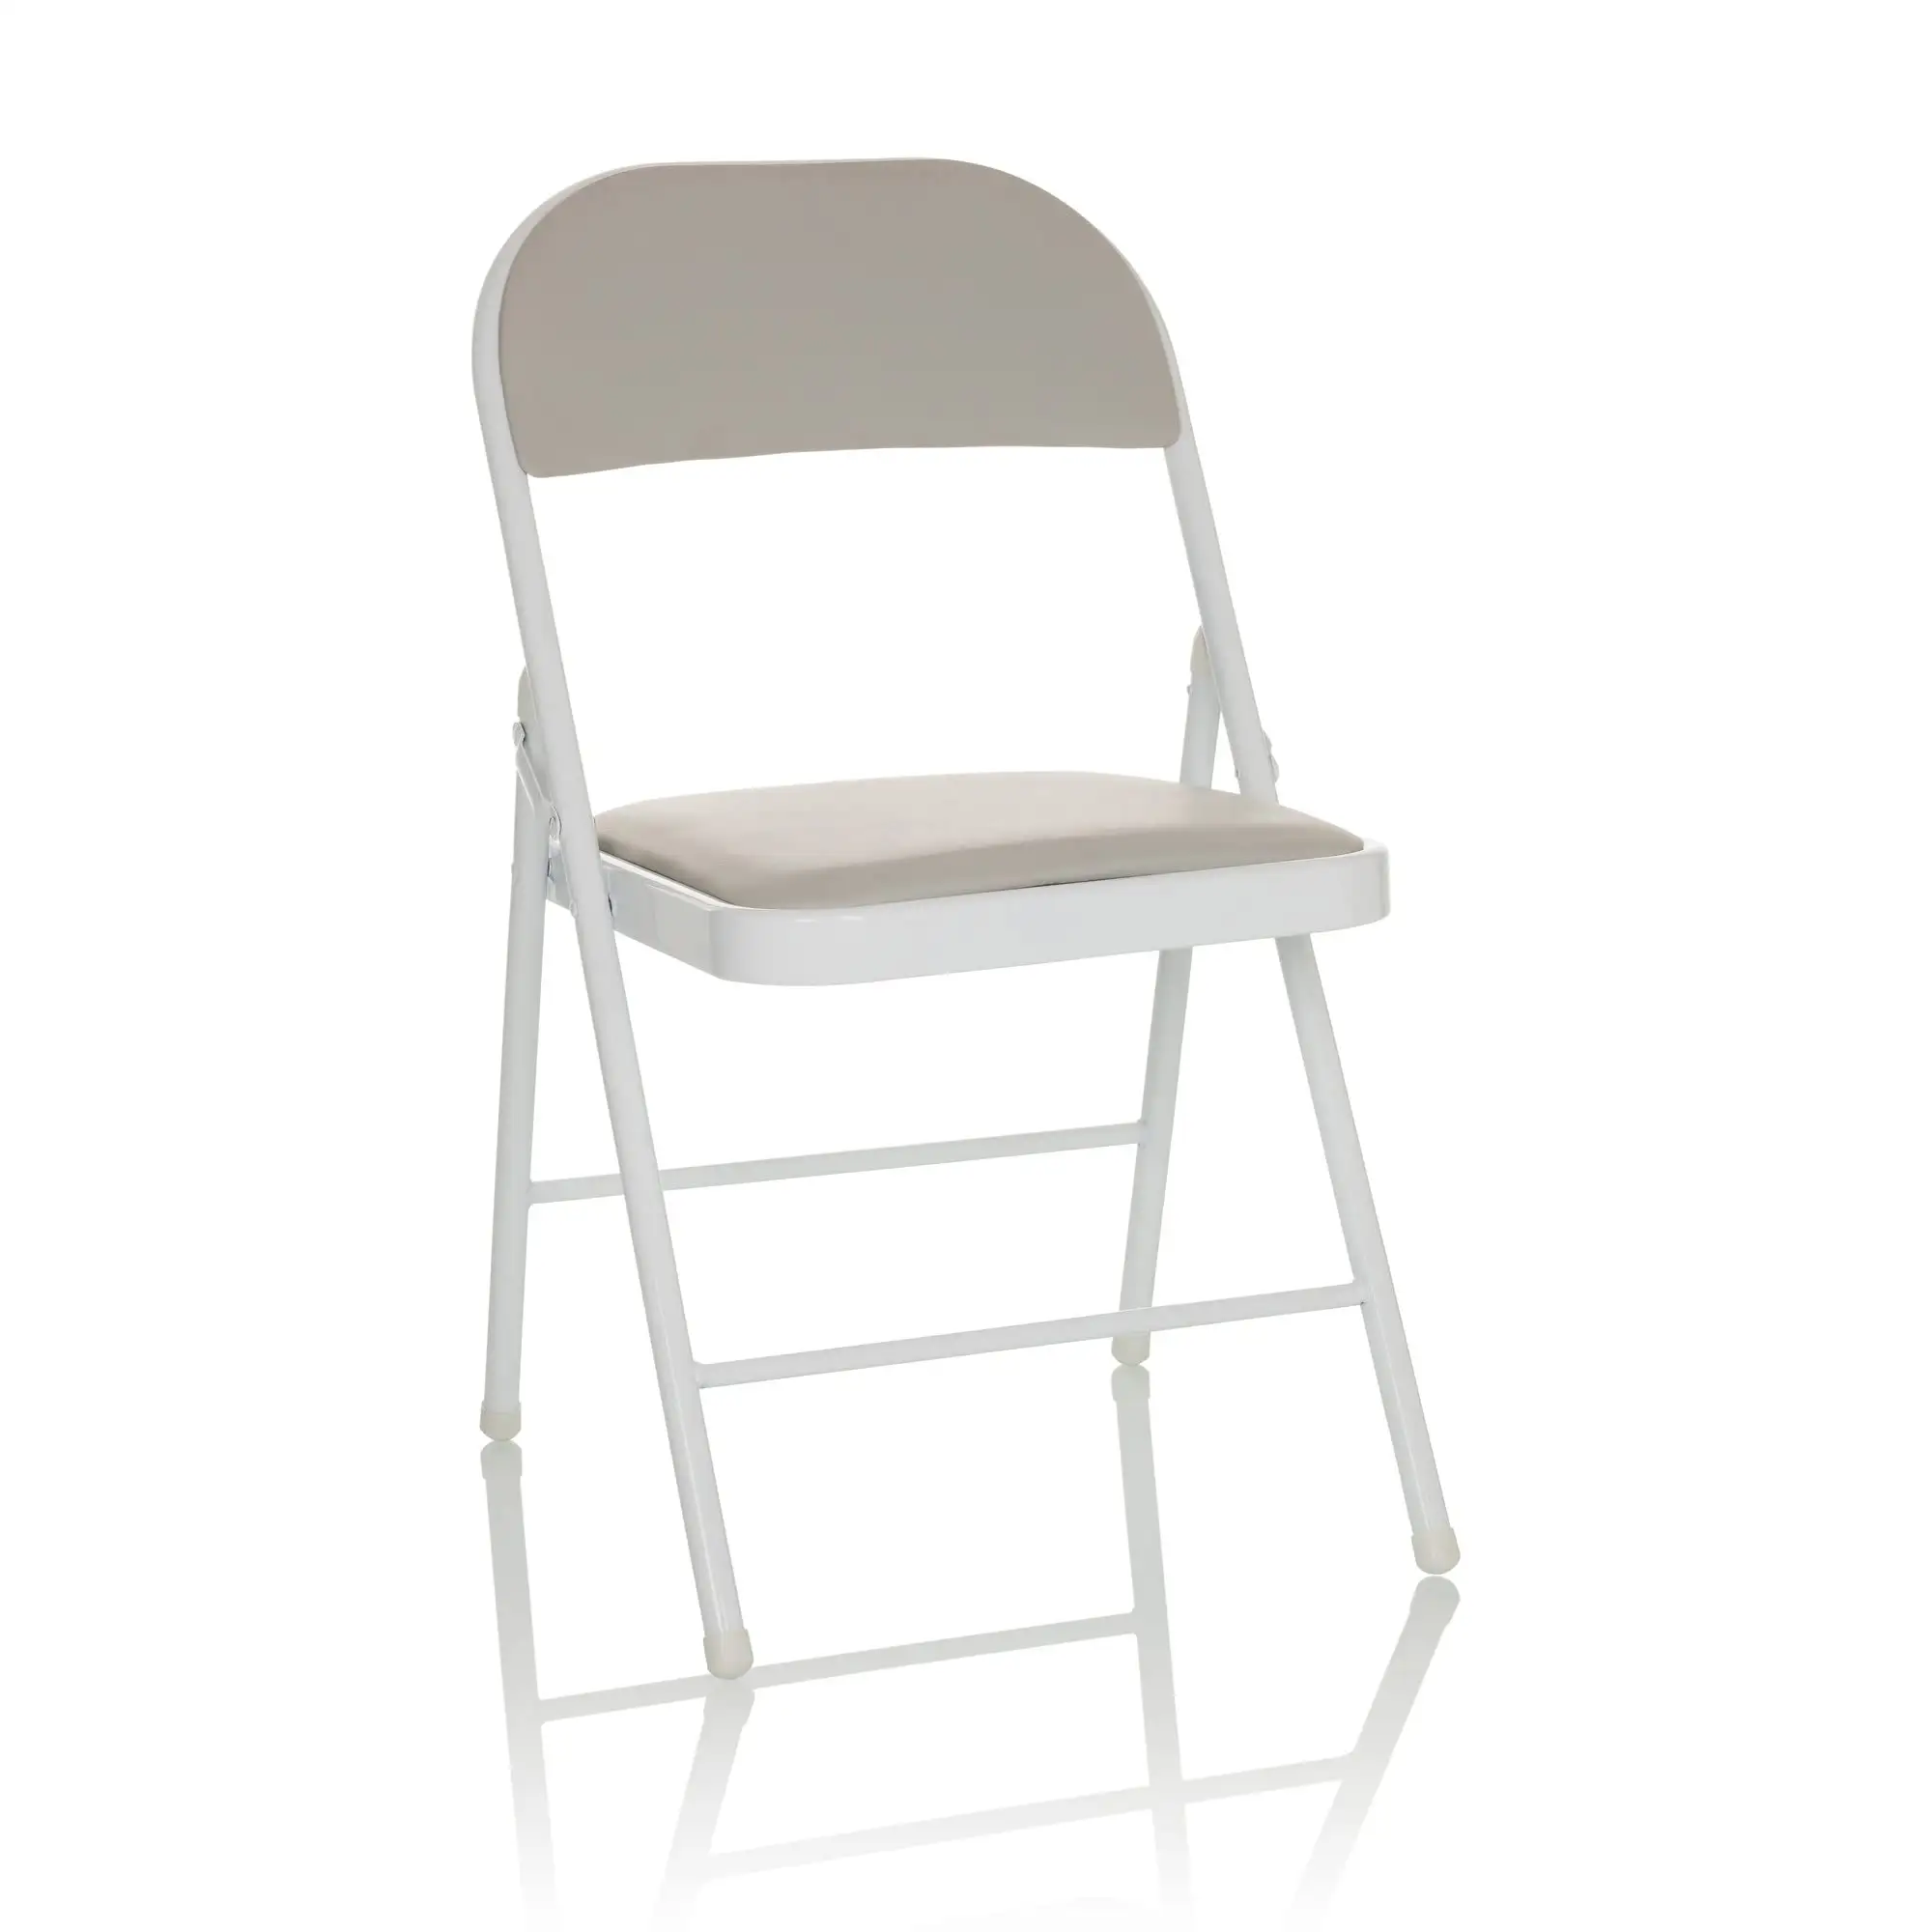 Multipurpose Folding Chair for Dining Kitchen Outdoor Garden Rental Party Training Sports Events Chairs